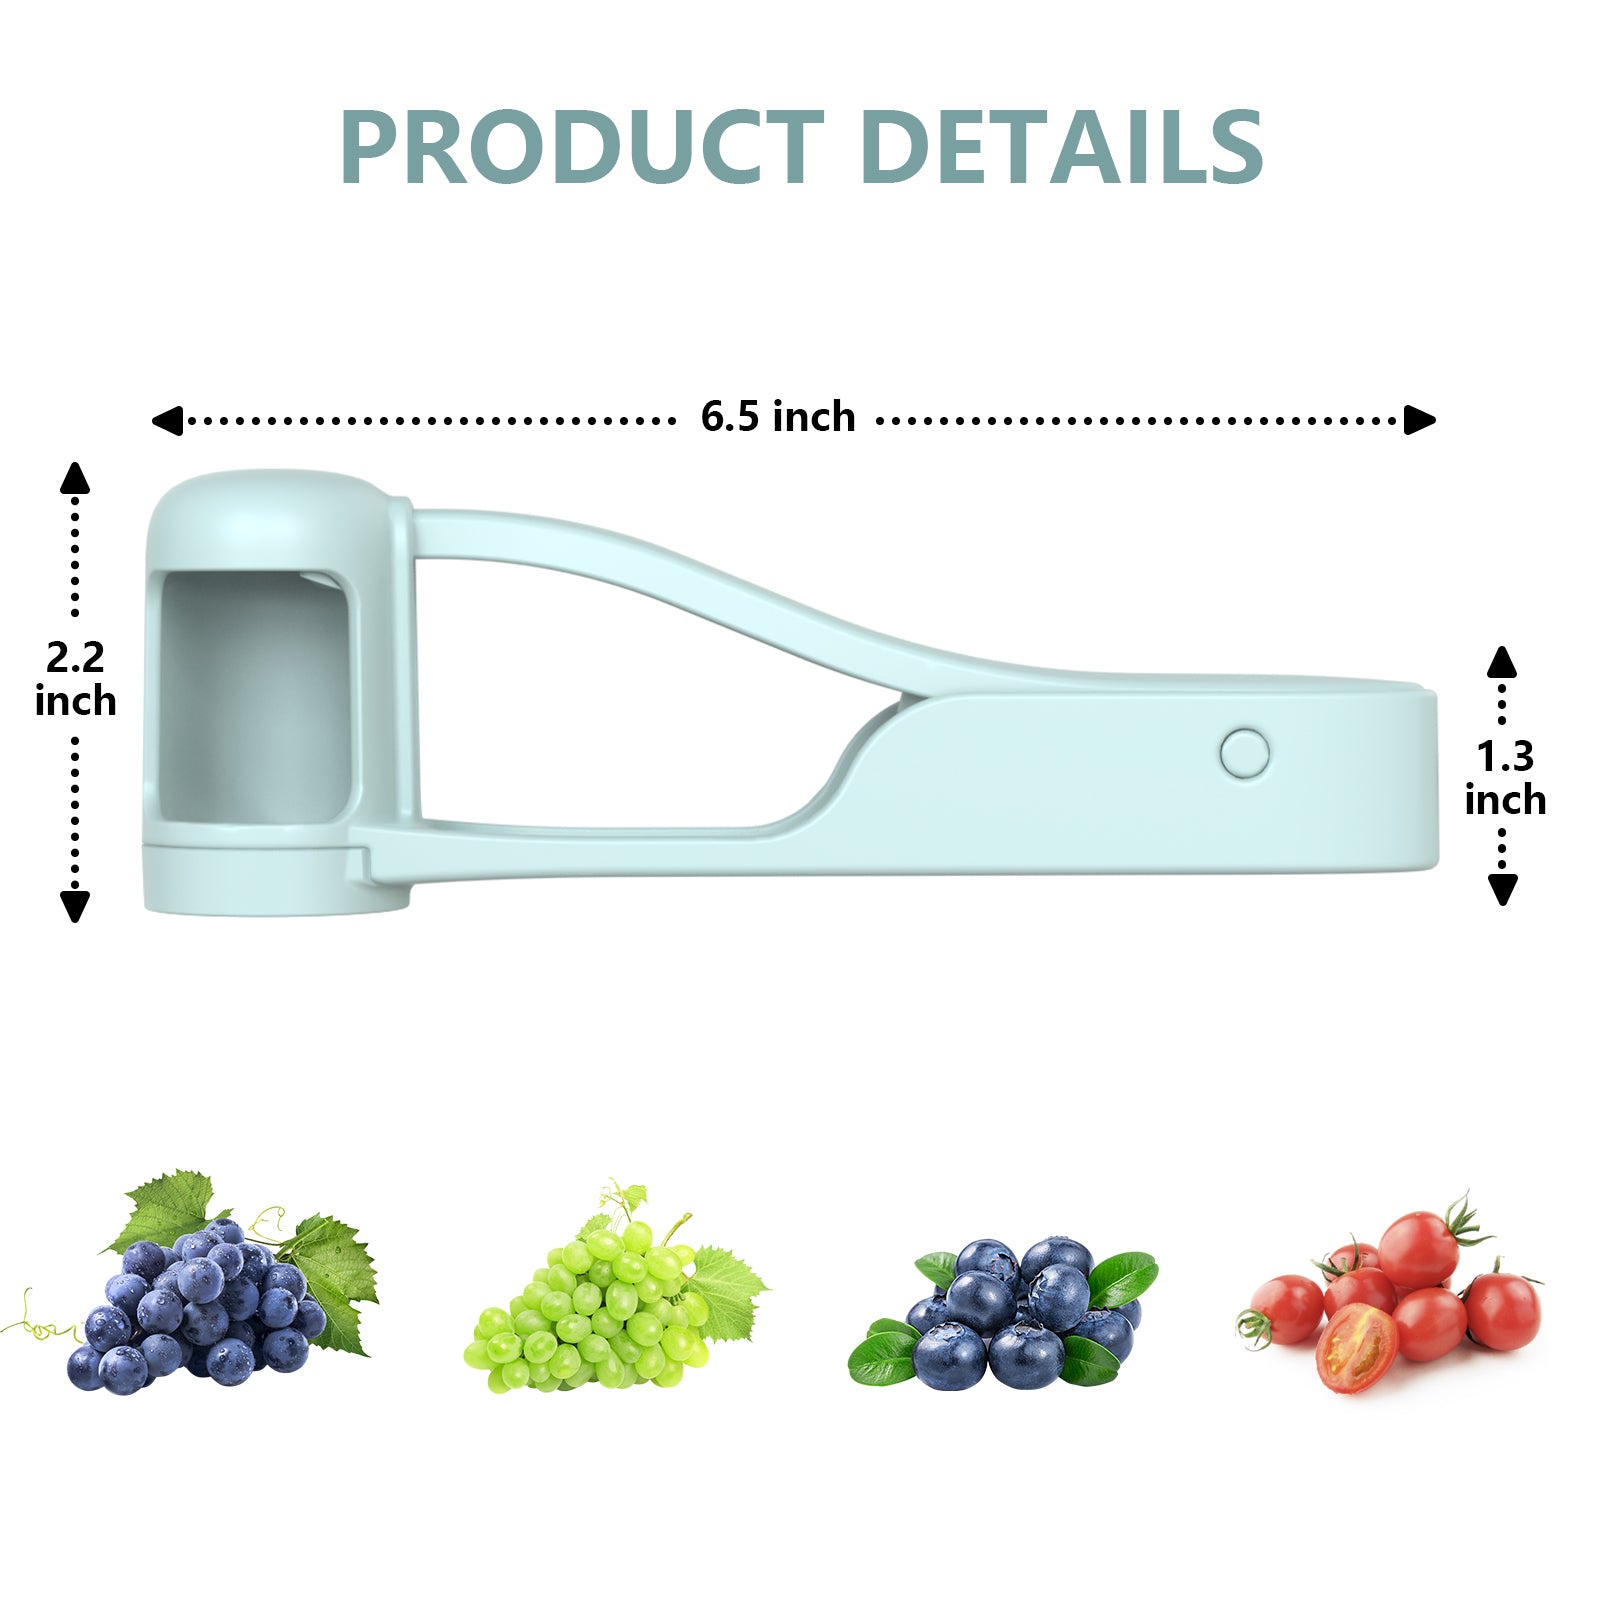 Rapid Slicer: Time-Saving Cutter For Cherry Tomatoes, Grapes & More